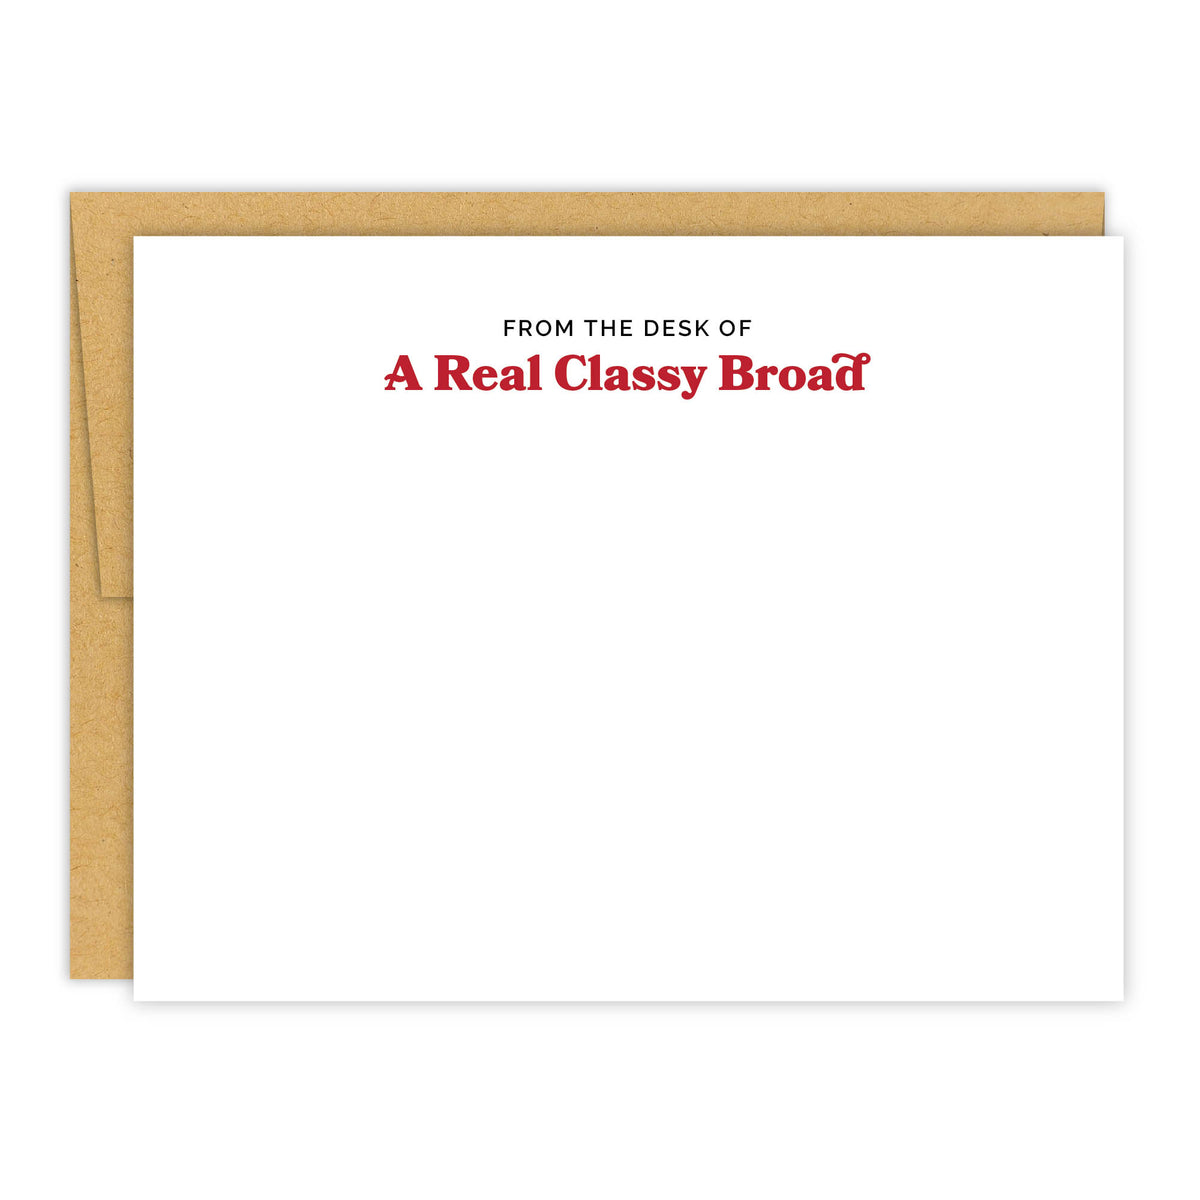 A Real Classy Broad Stationery Set